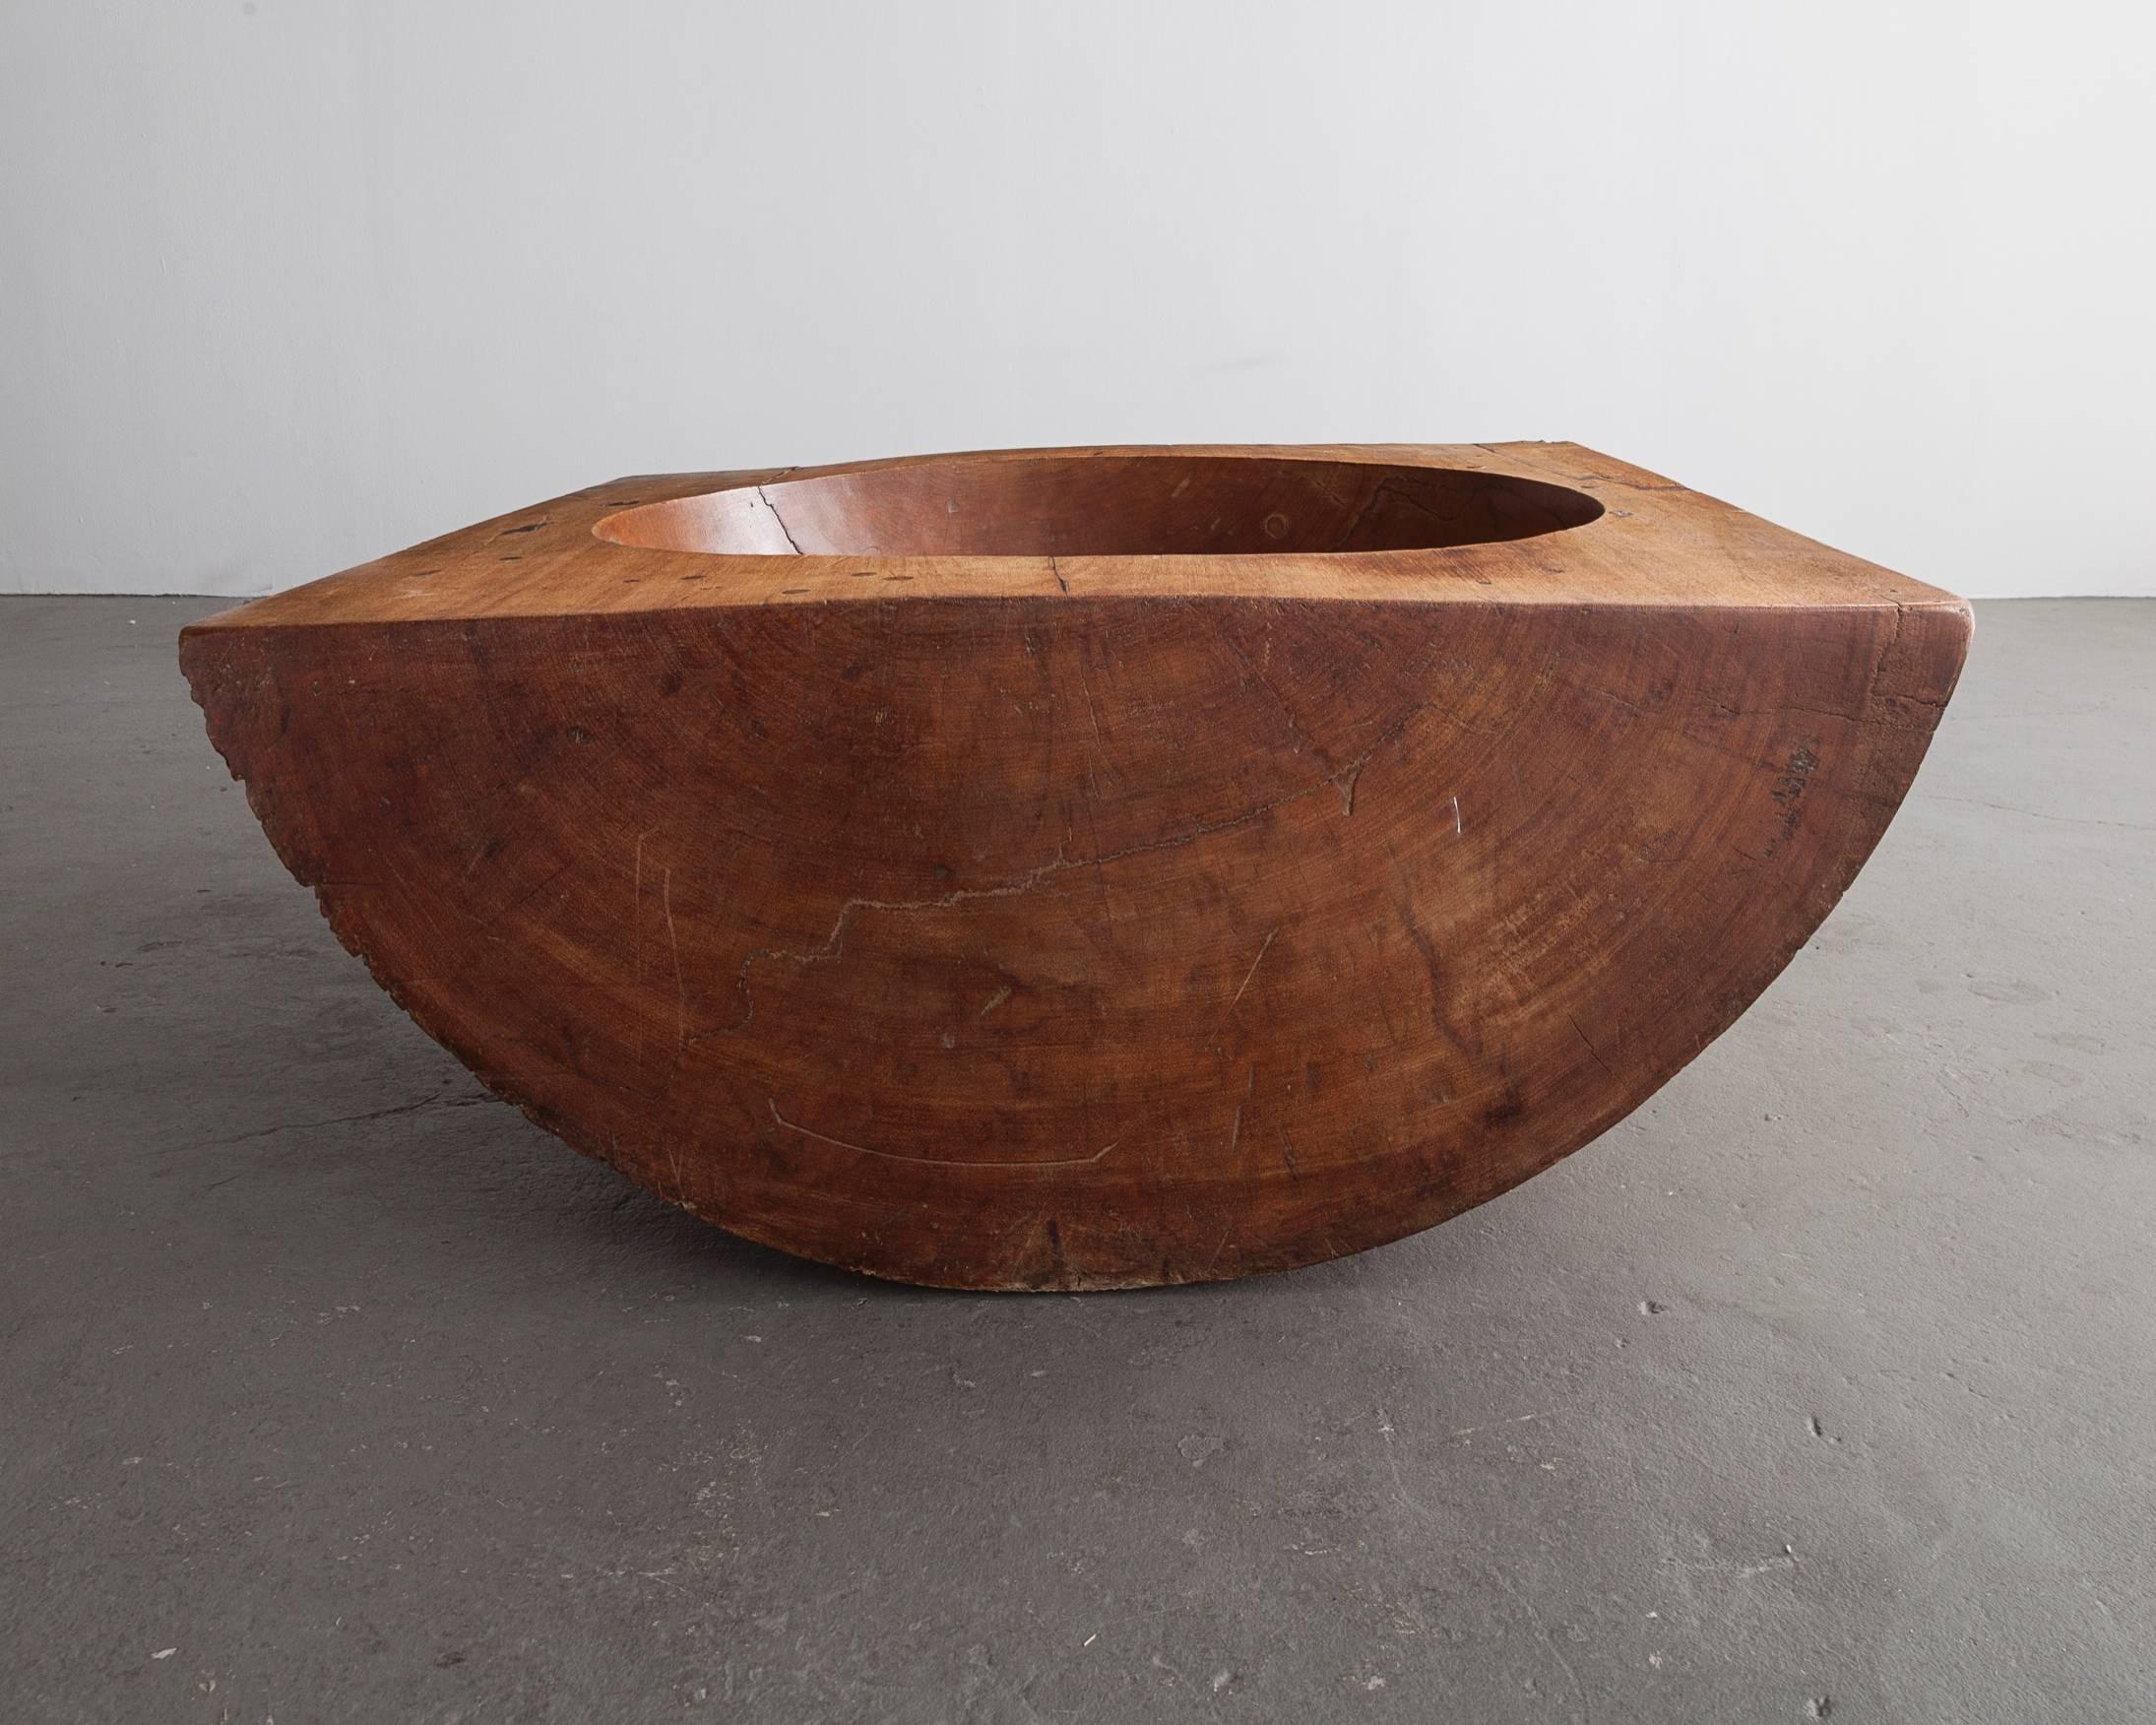 Coffee table in solid wood with sculpted concave center. Designed by Jose Zanine, Brazil, circa 1960.